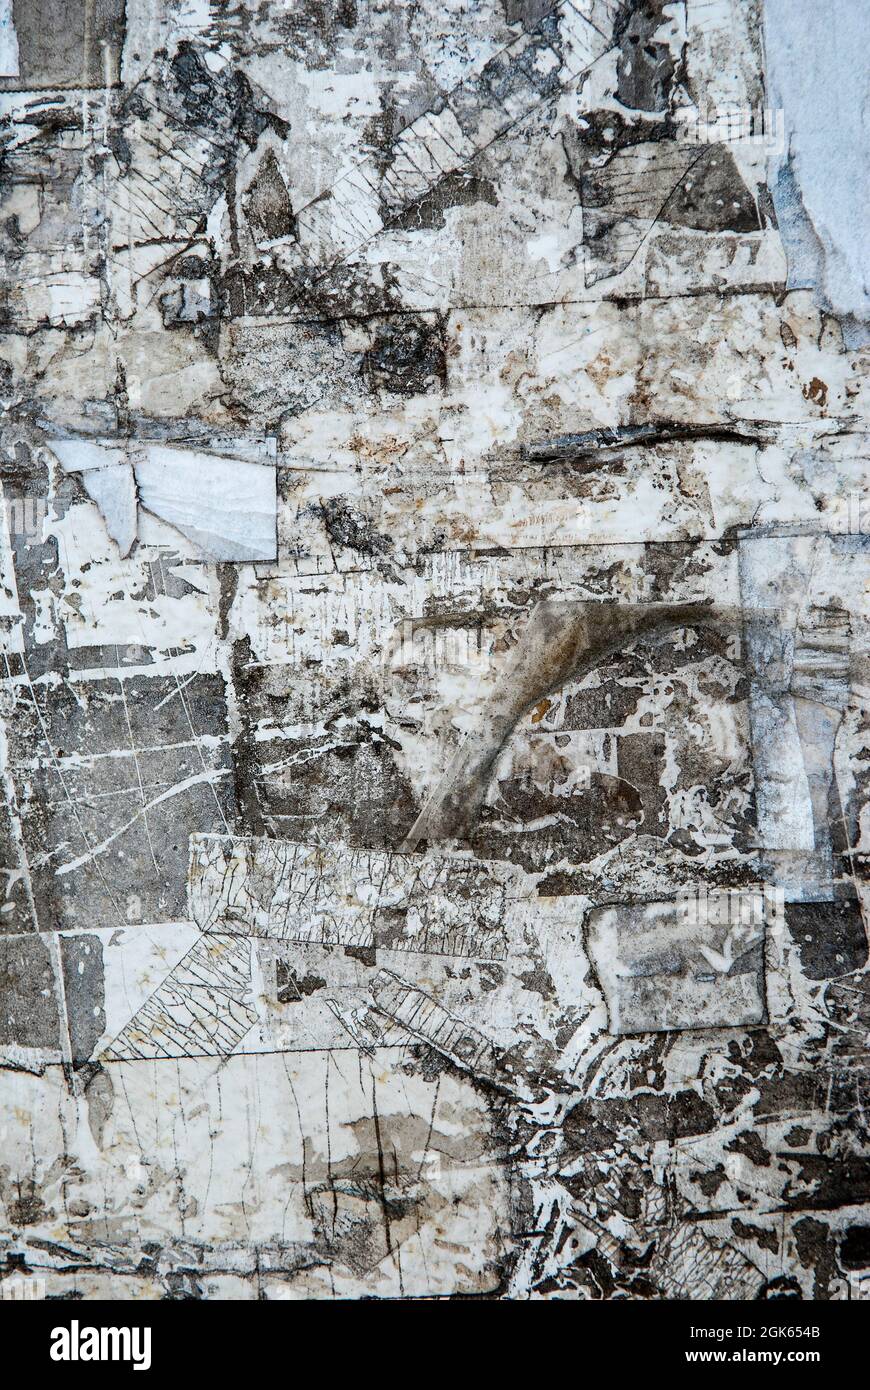 Torn Poster Paper Wall Texture Pattern as Urban Background Vintage. Stock Photo